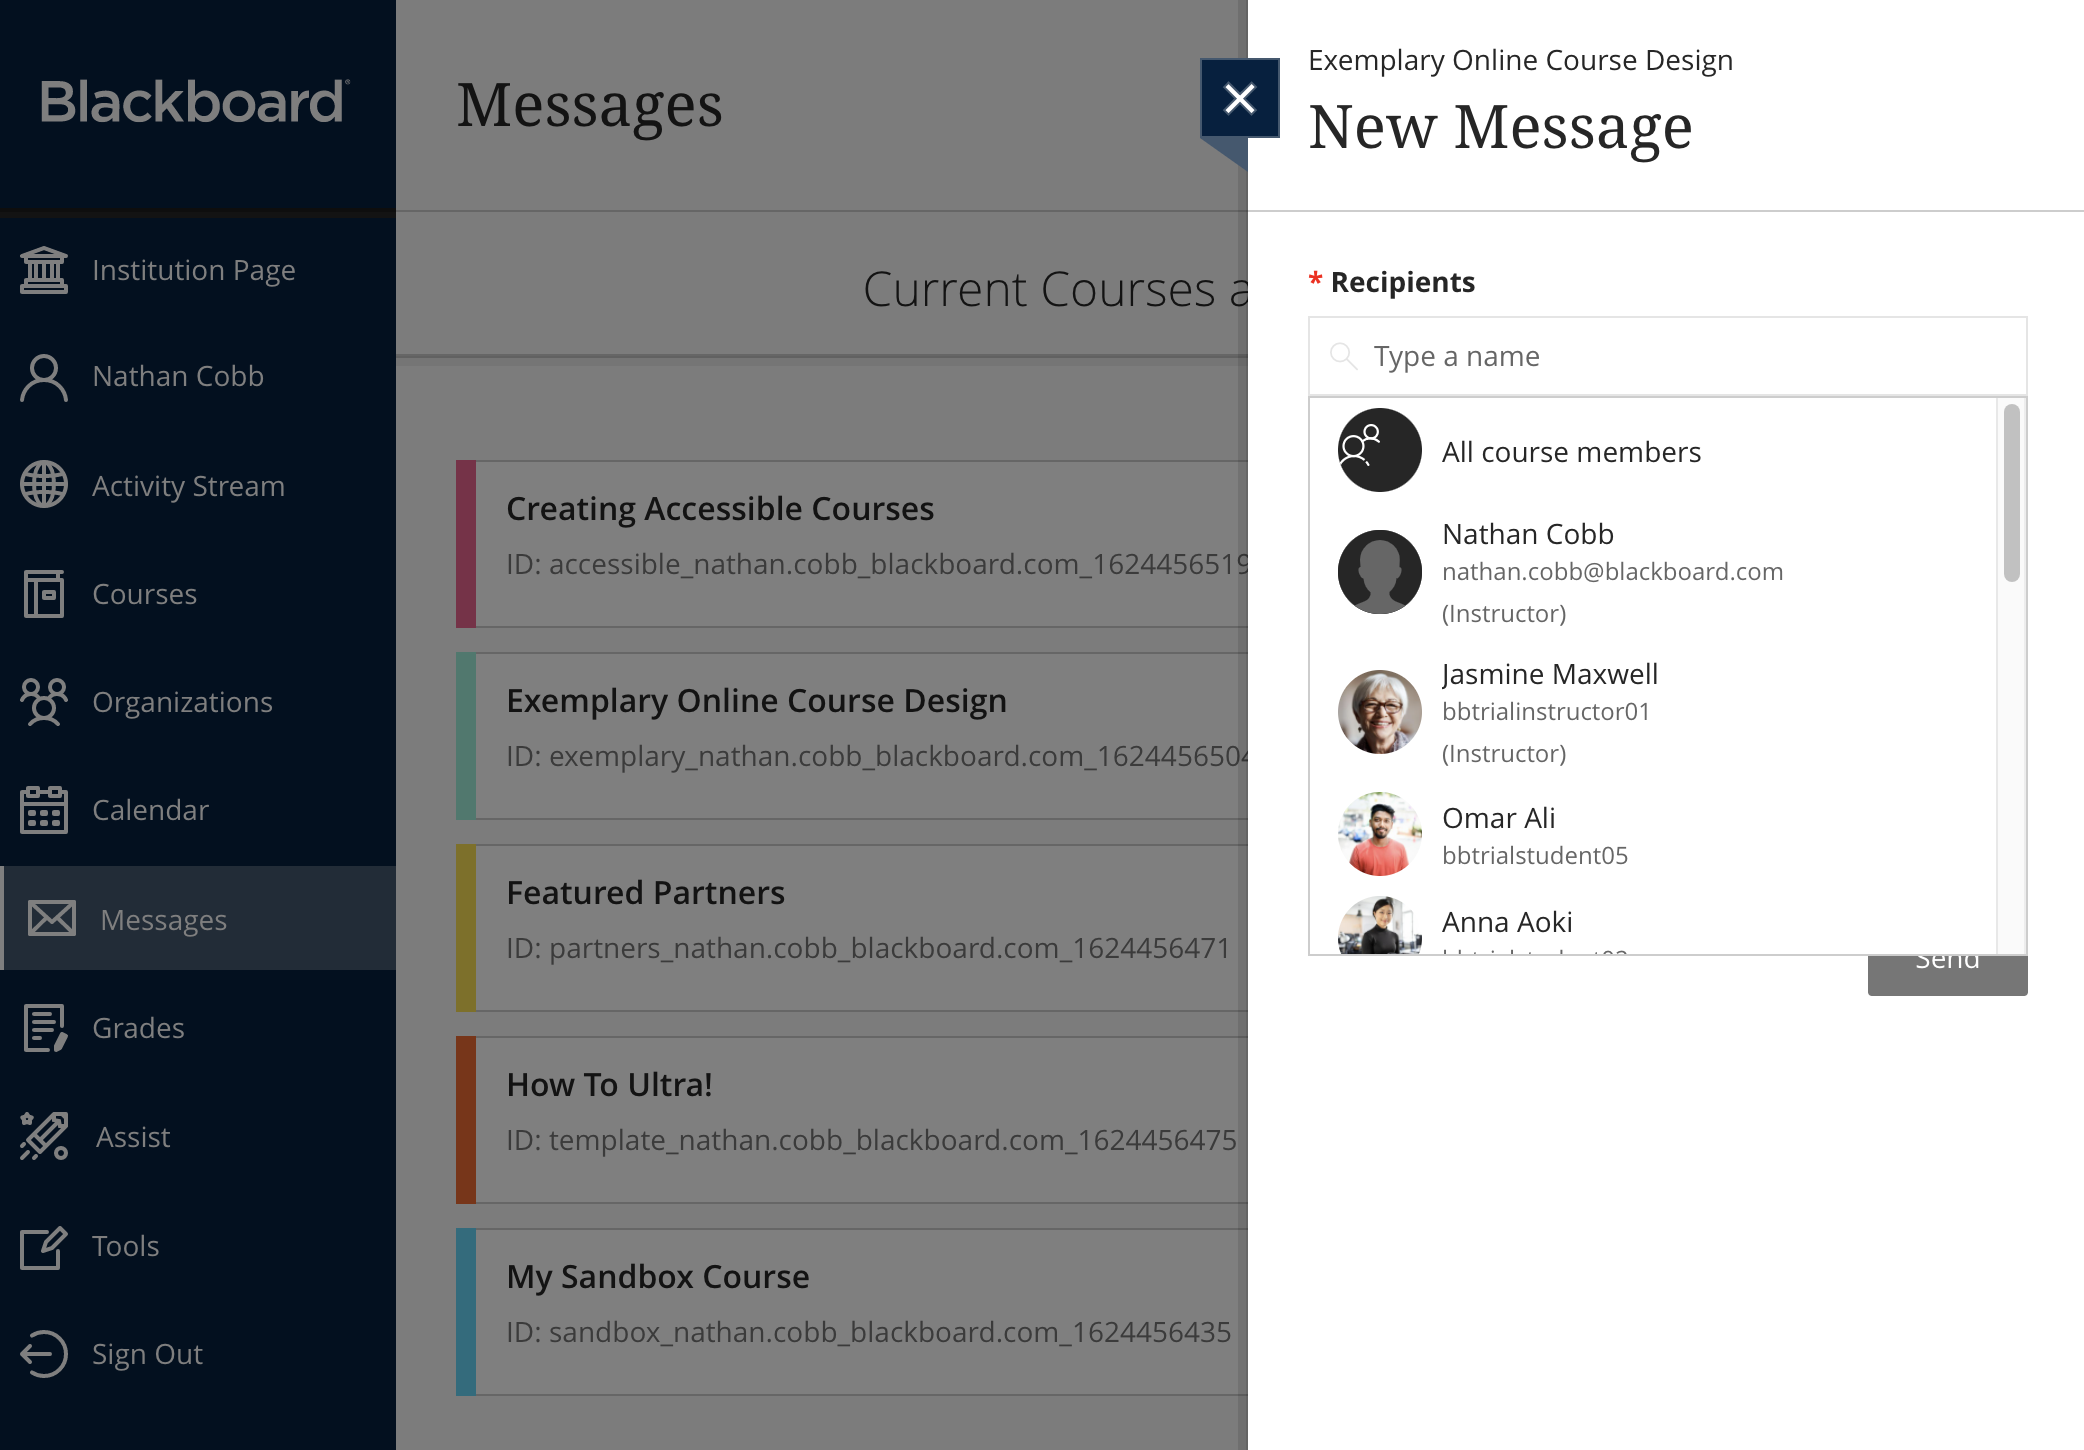 Image of Messages page from Base Navigation